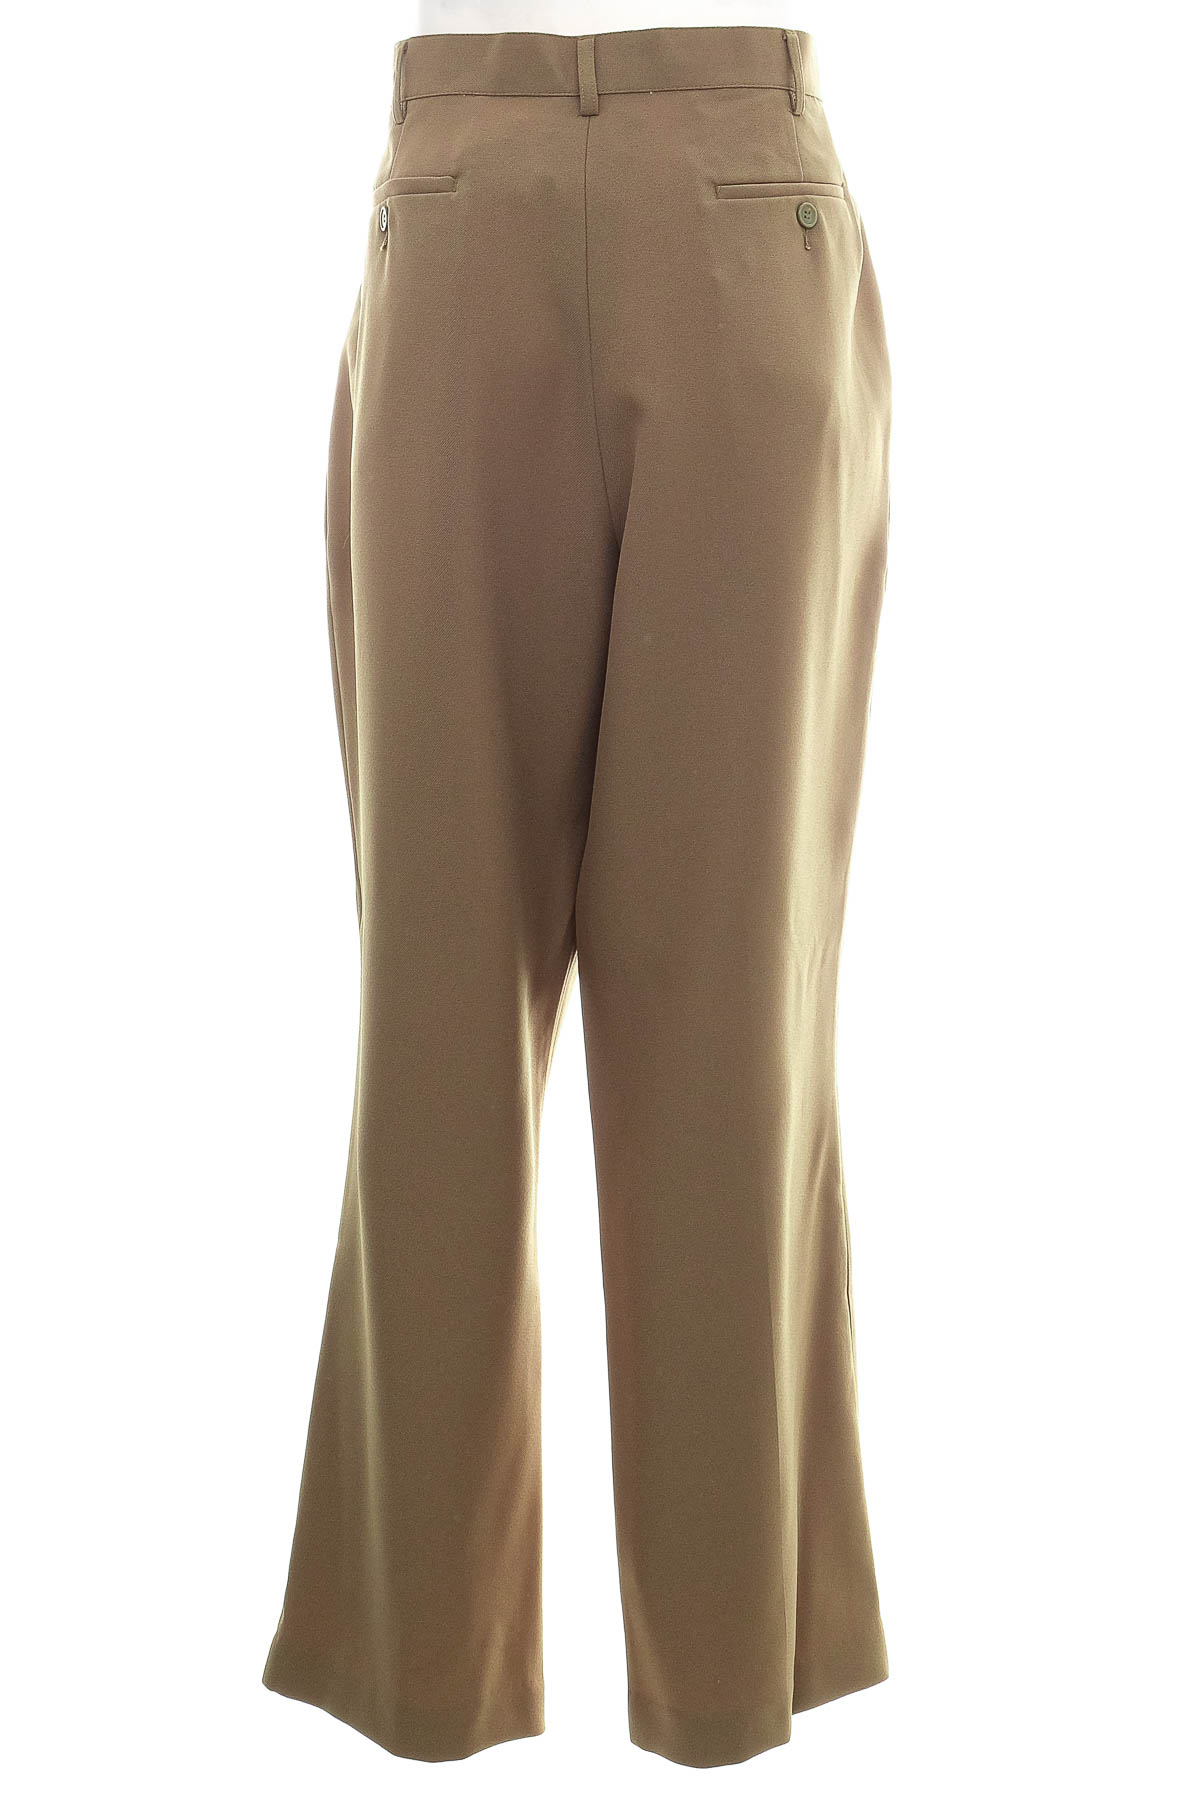 Men's trousers - HABAND - 1